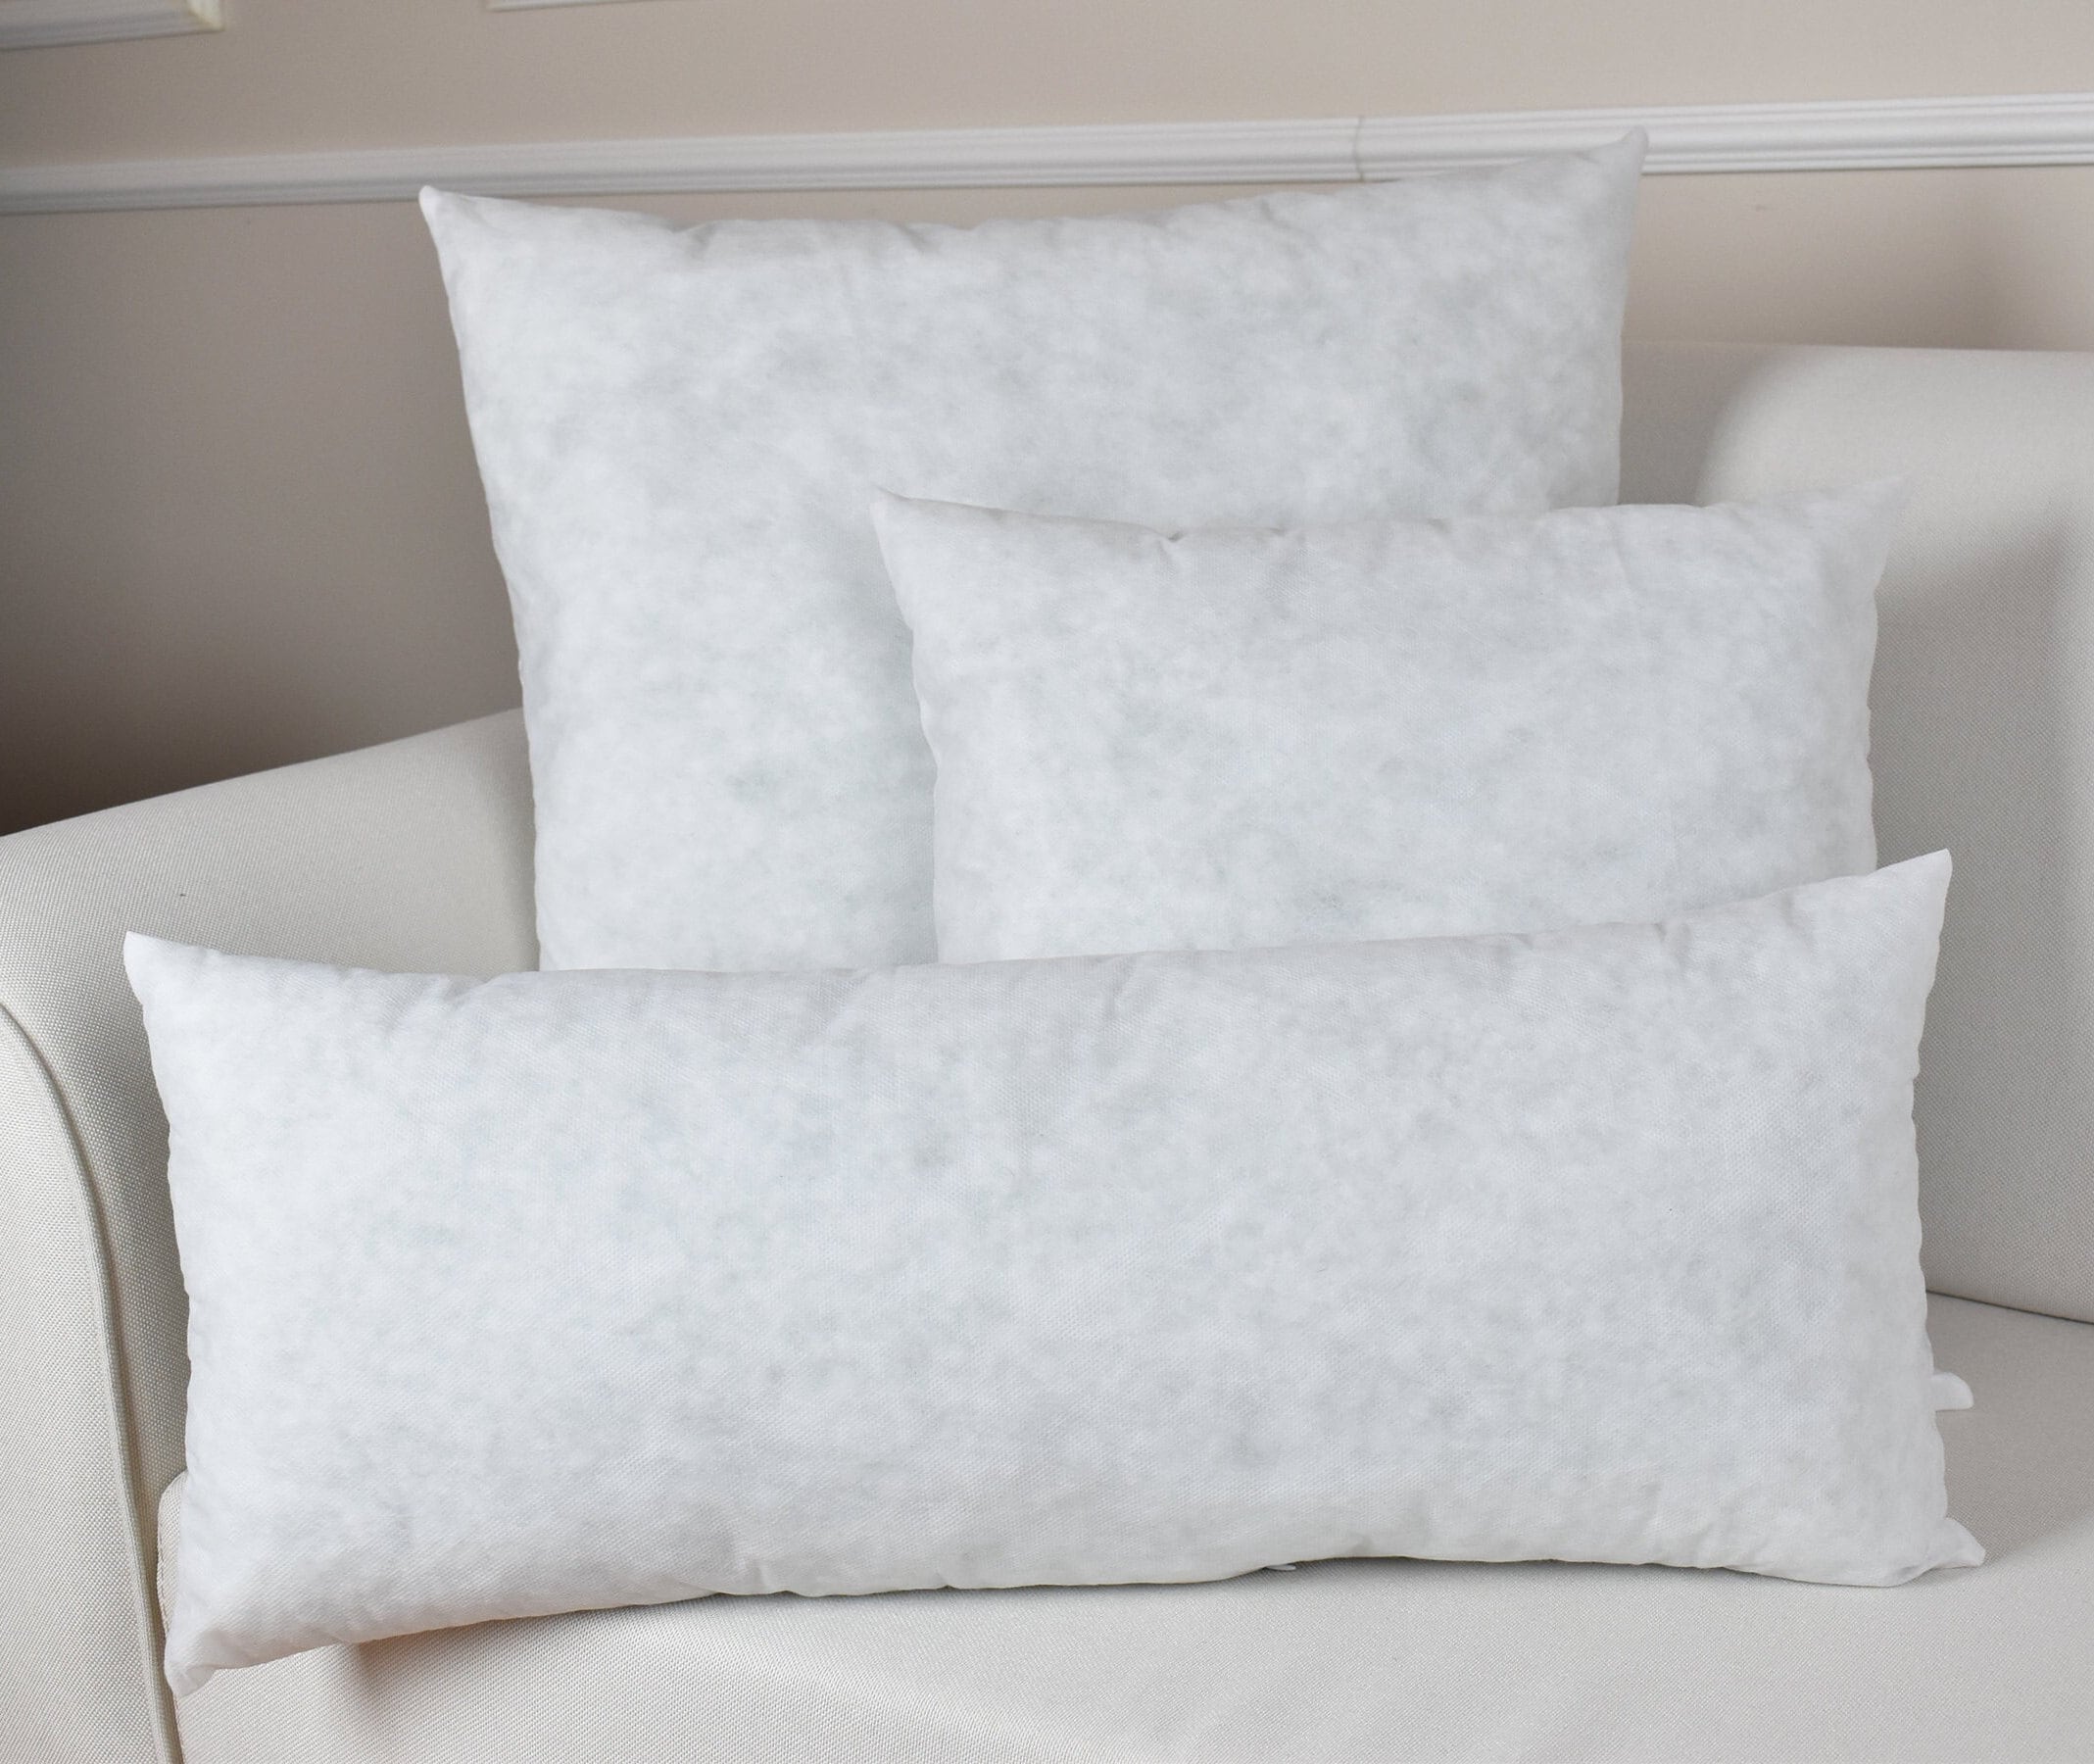 Upgraded U Shaped Body Pillow With Memory Foam or Cotton Stuffing 